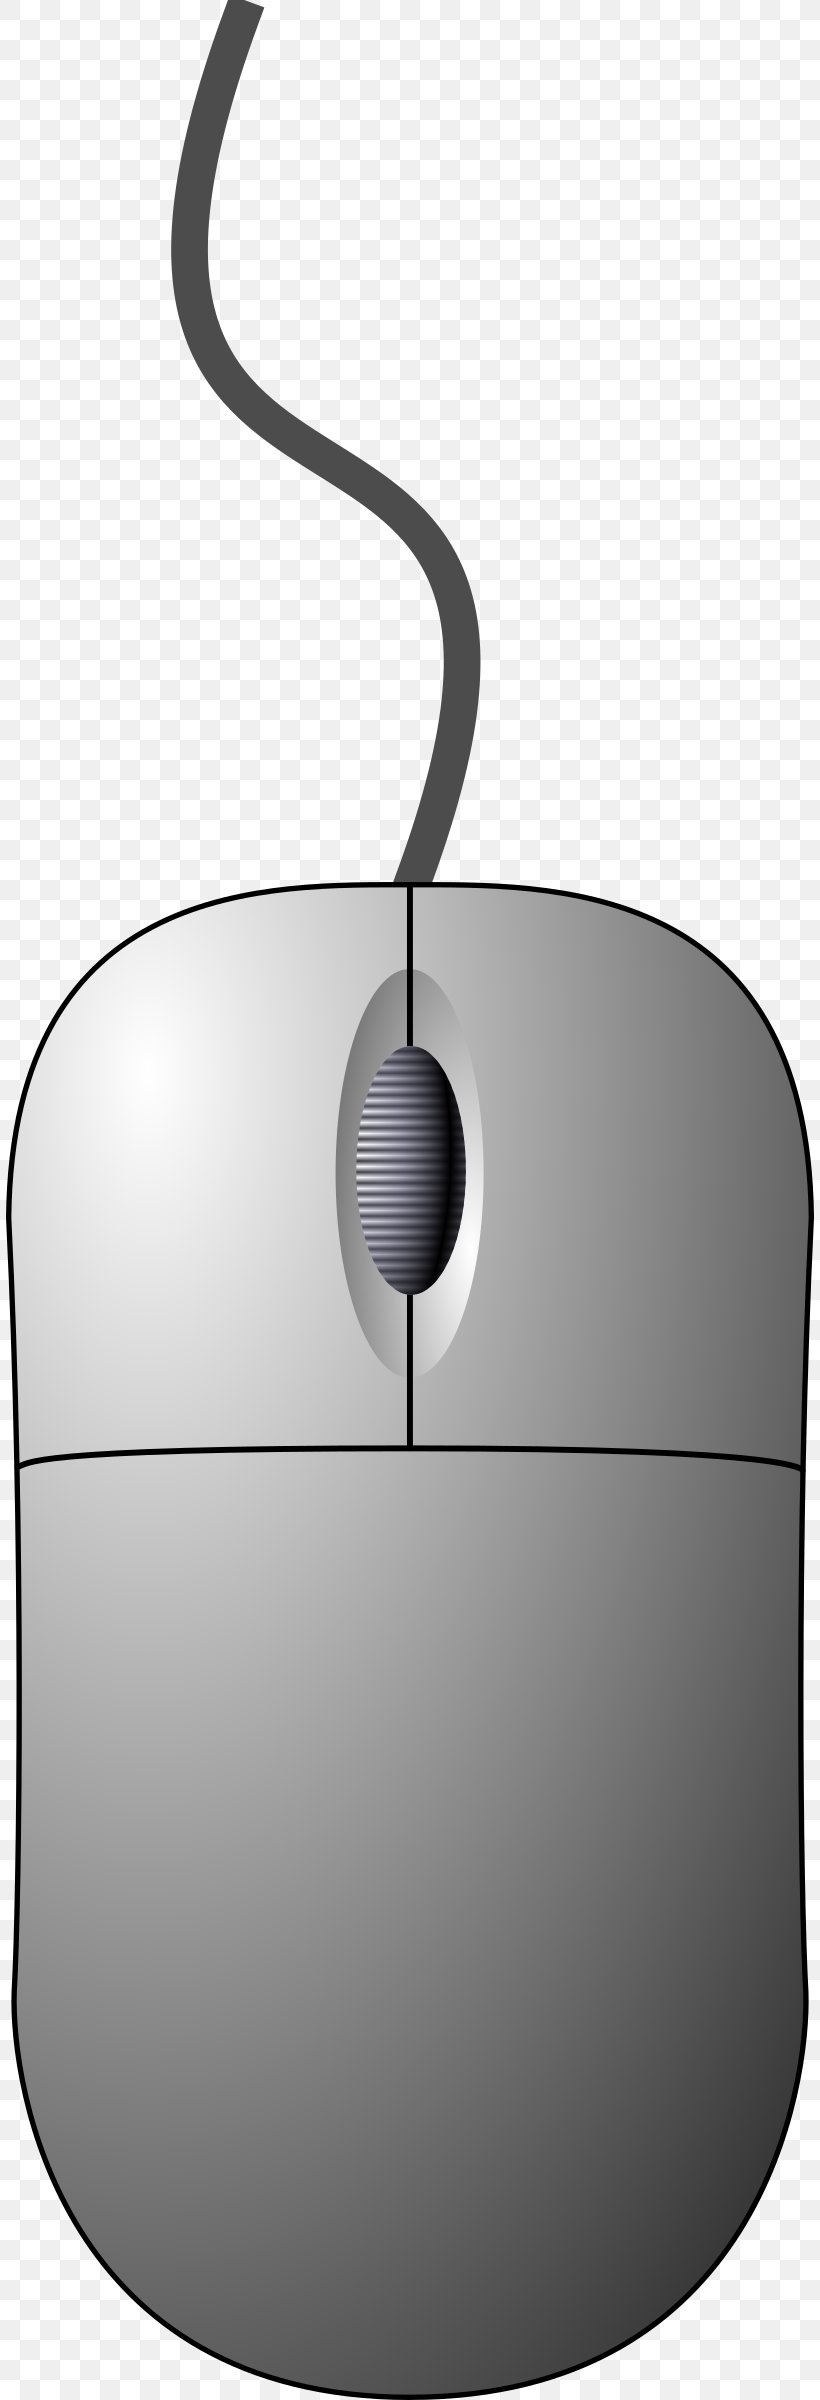 Computer Mouse Clip Art, PNG, 808x2400px, Computer Mouse, Computer, Computer Component, Electronic Device, Mouse Download Free